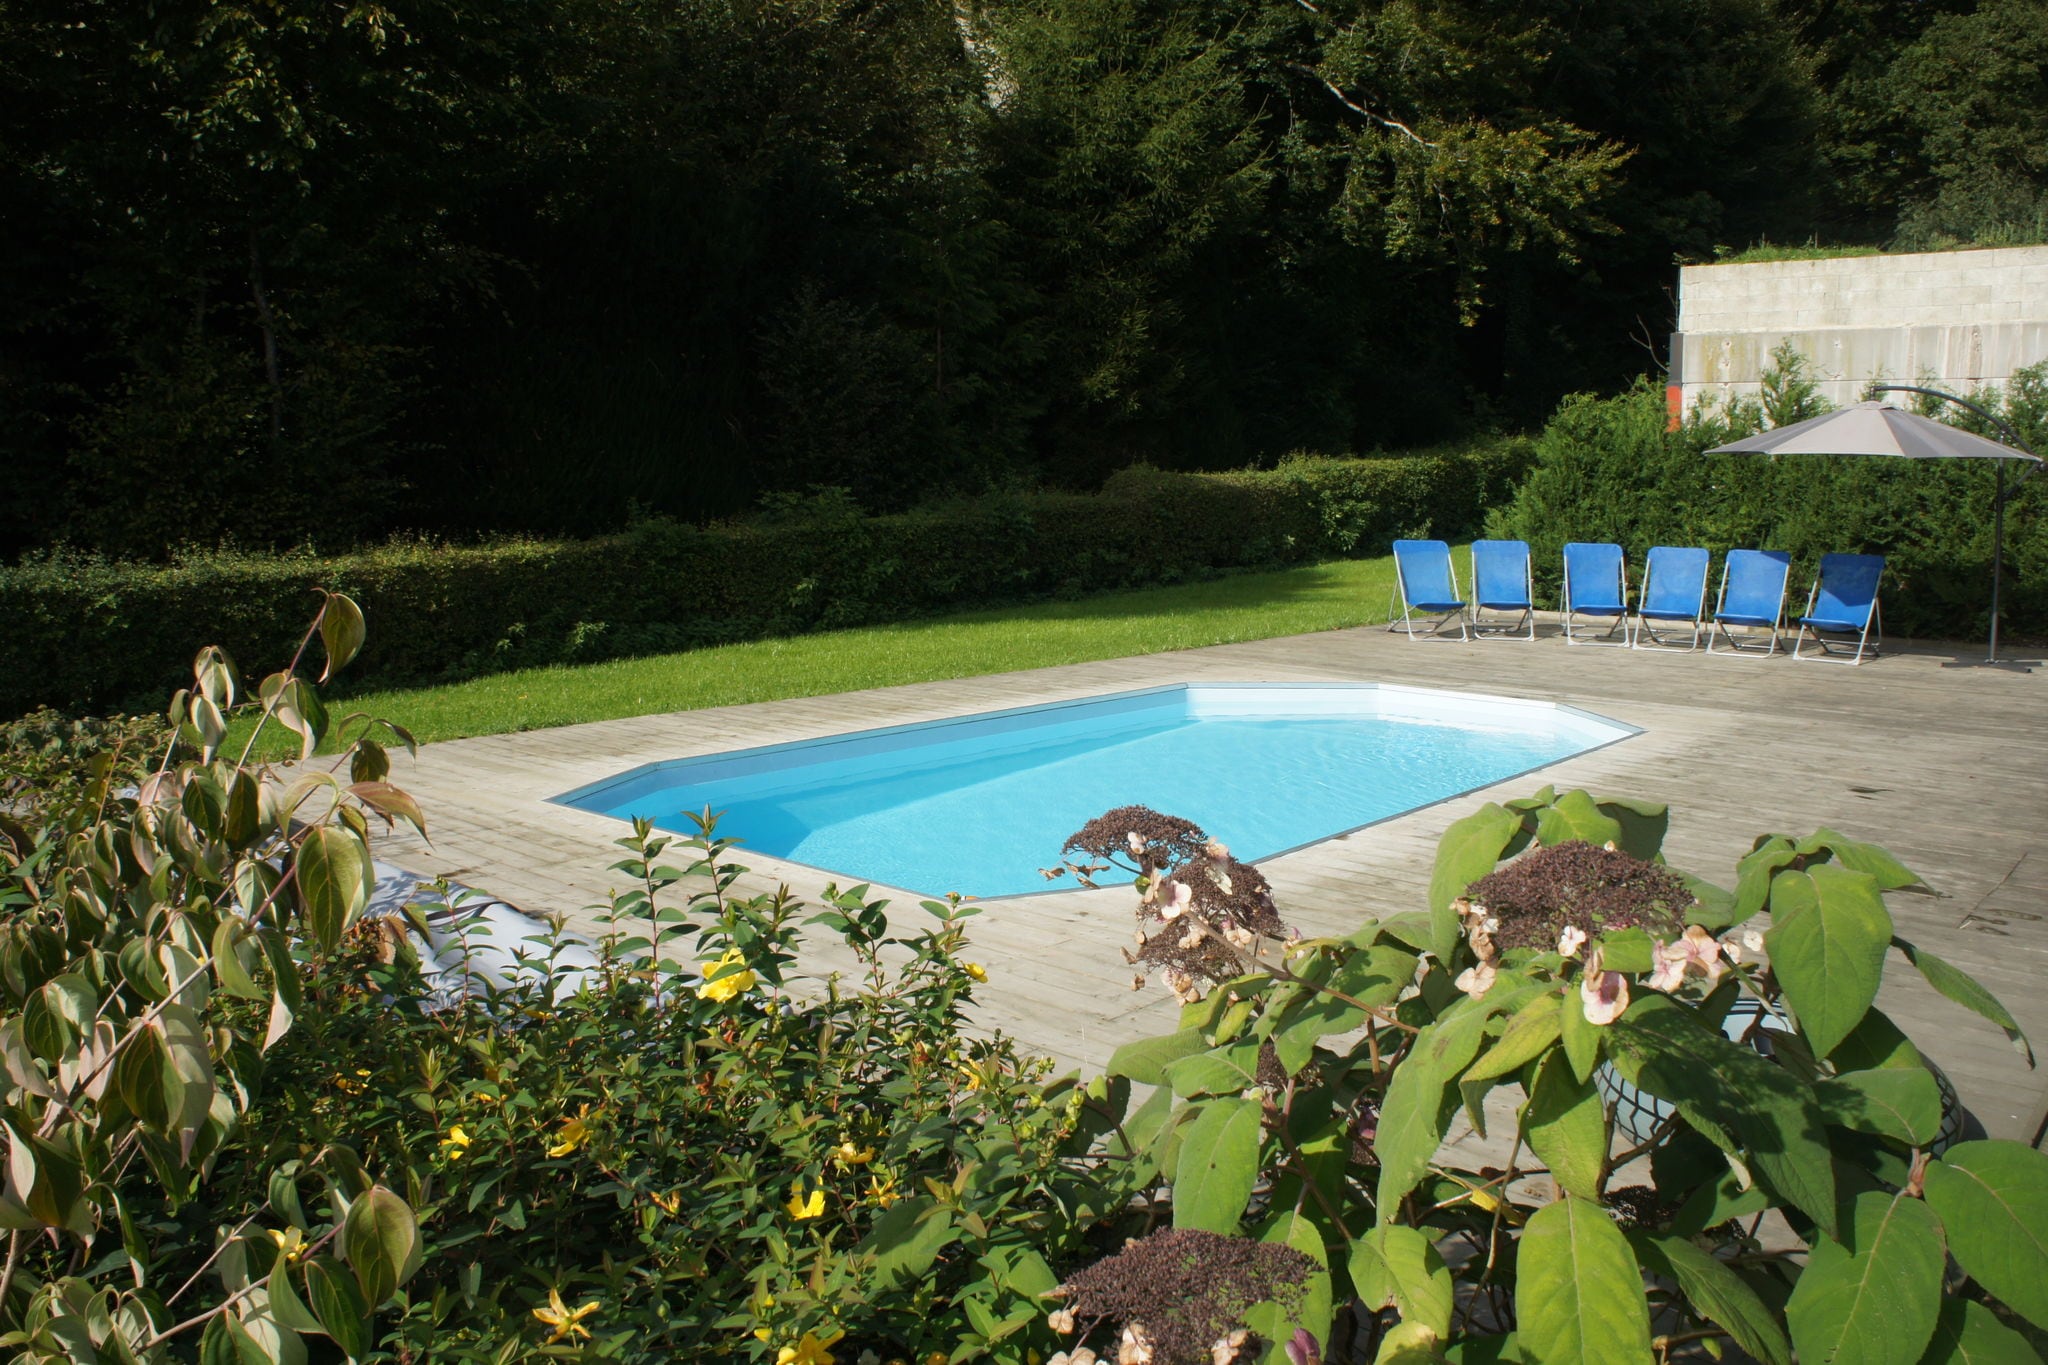 Gite for person with reduced mobility with outdoor pool